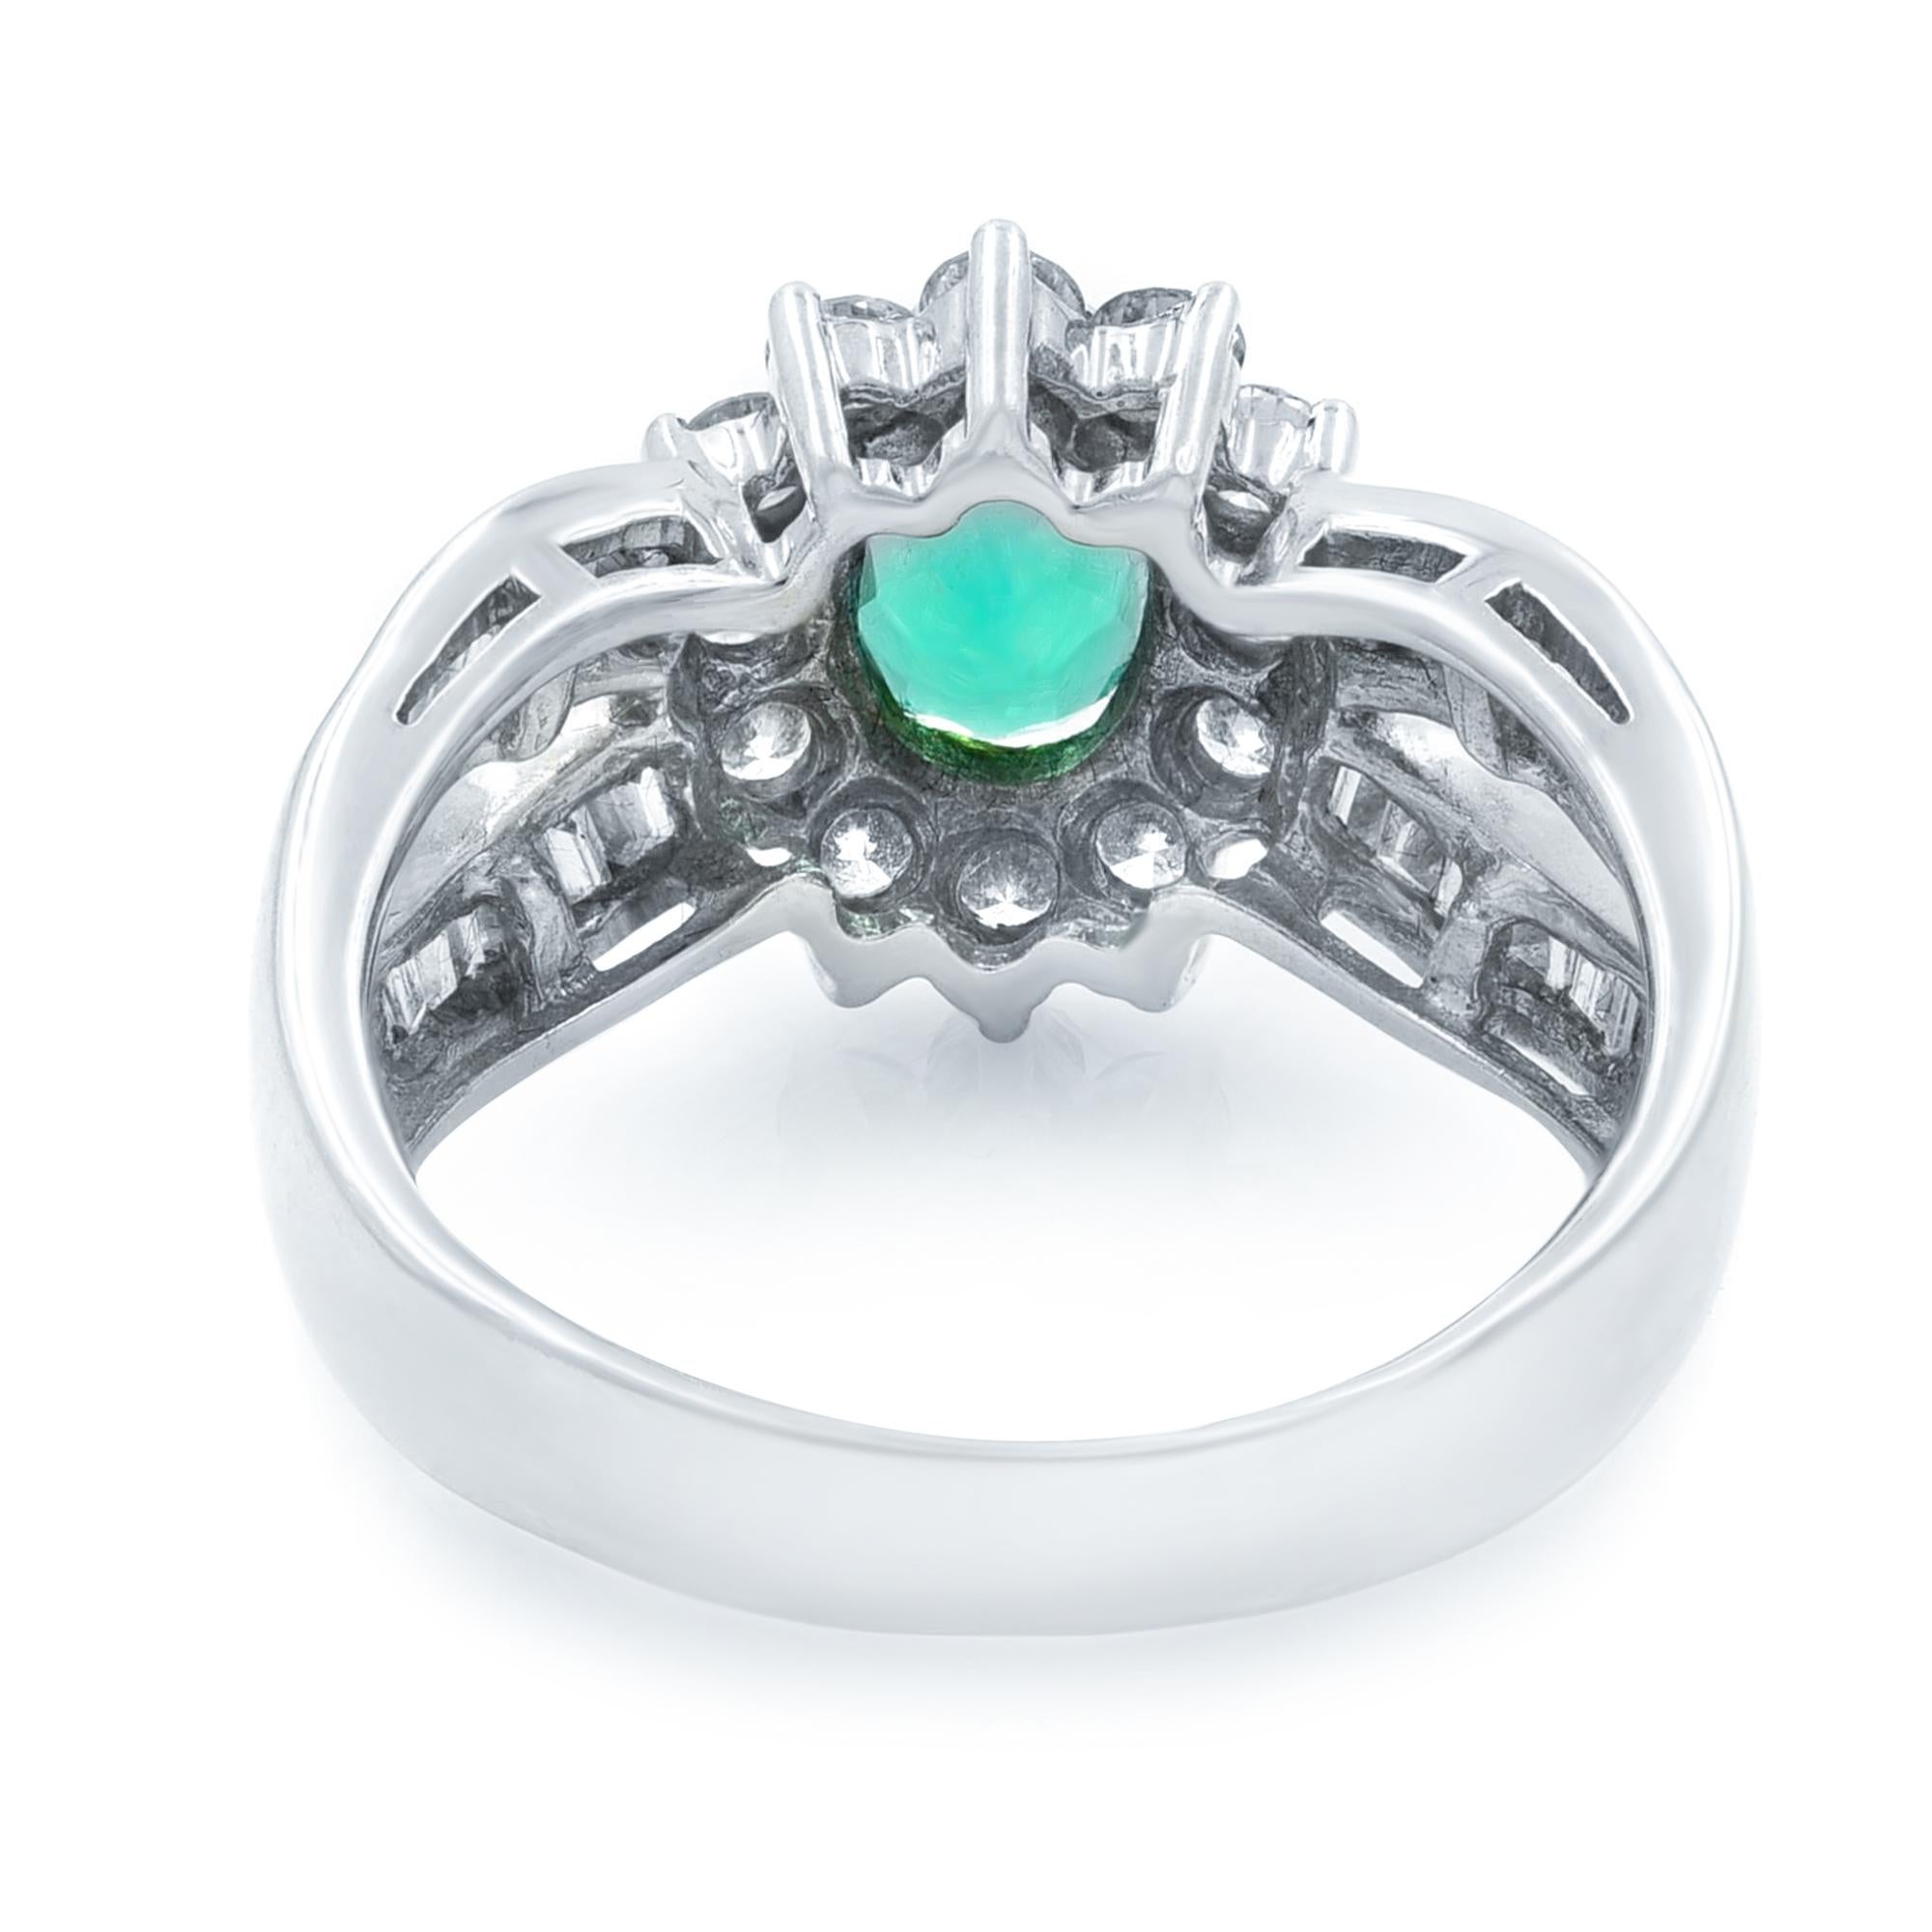 A modestly proportioned gorgeous, vibrant green 1.00 carat emerald, fashioned in a striking oval-cut shape, centers a classic retro sparkler, hand fabricated in 18k white gold geometric design and embellished all around with small round diamonds and